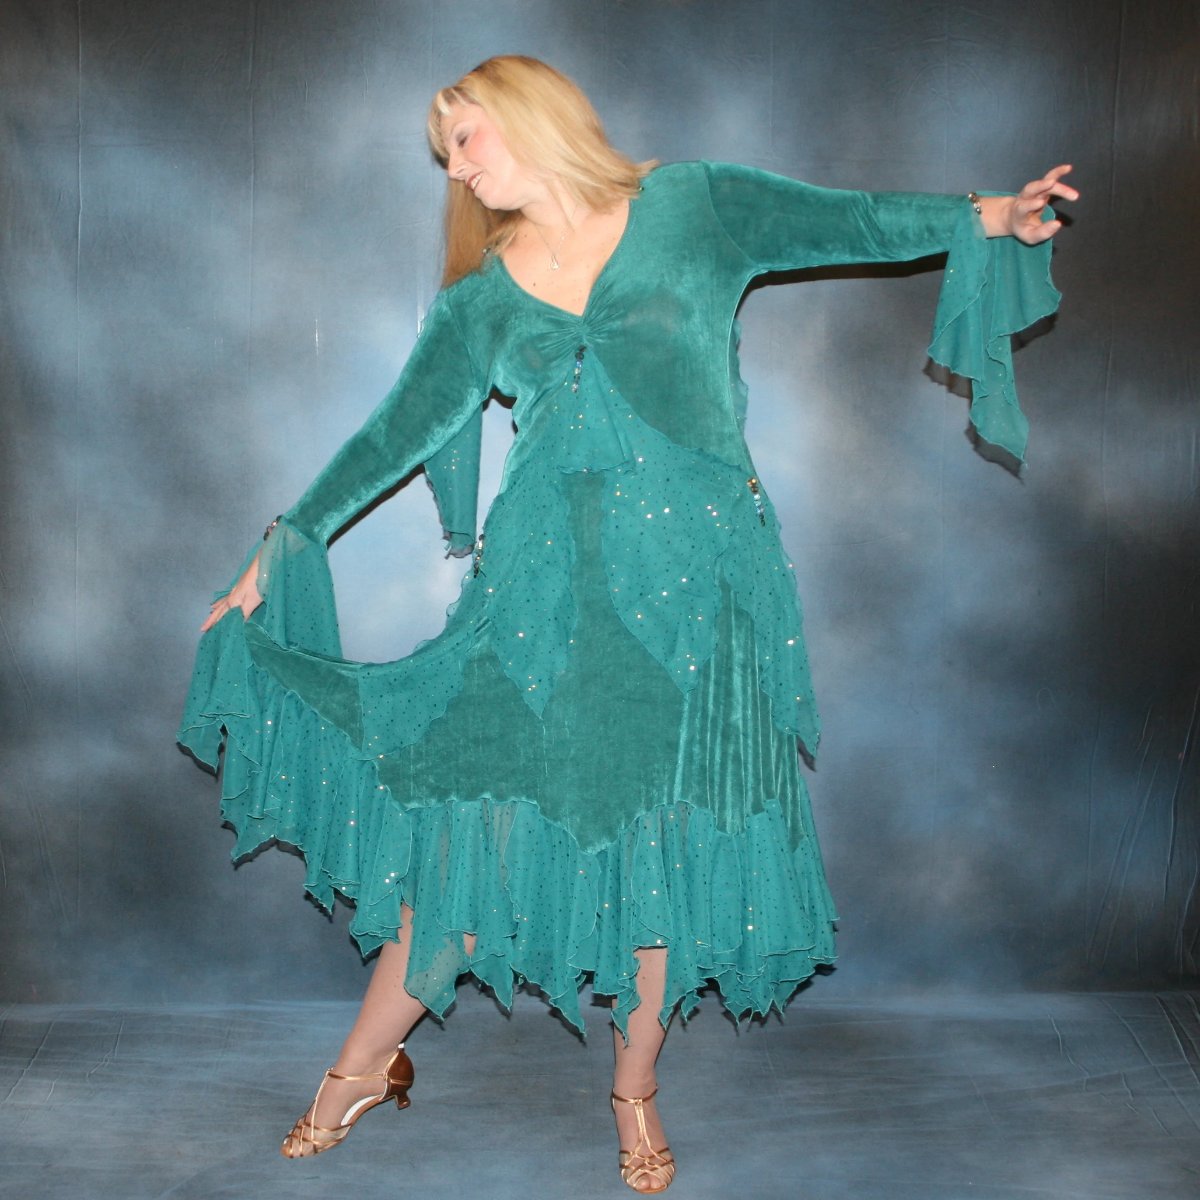 Teal plus size ballroom dance dress was created in luxurious teal solid slinky with oodles of champagne sequined chiffon flounces & floats, embellished with a lovely touch of Swarovski hand beading. on blonde model